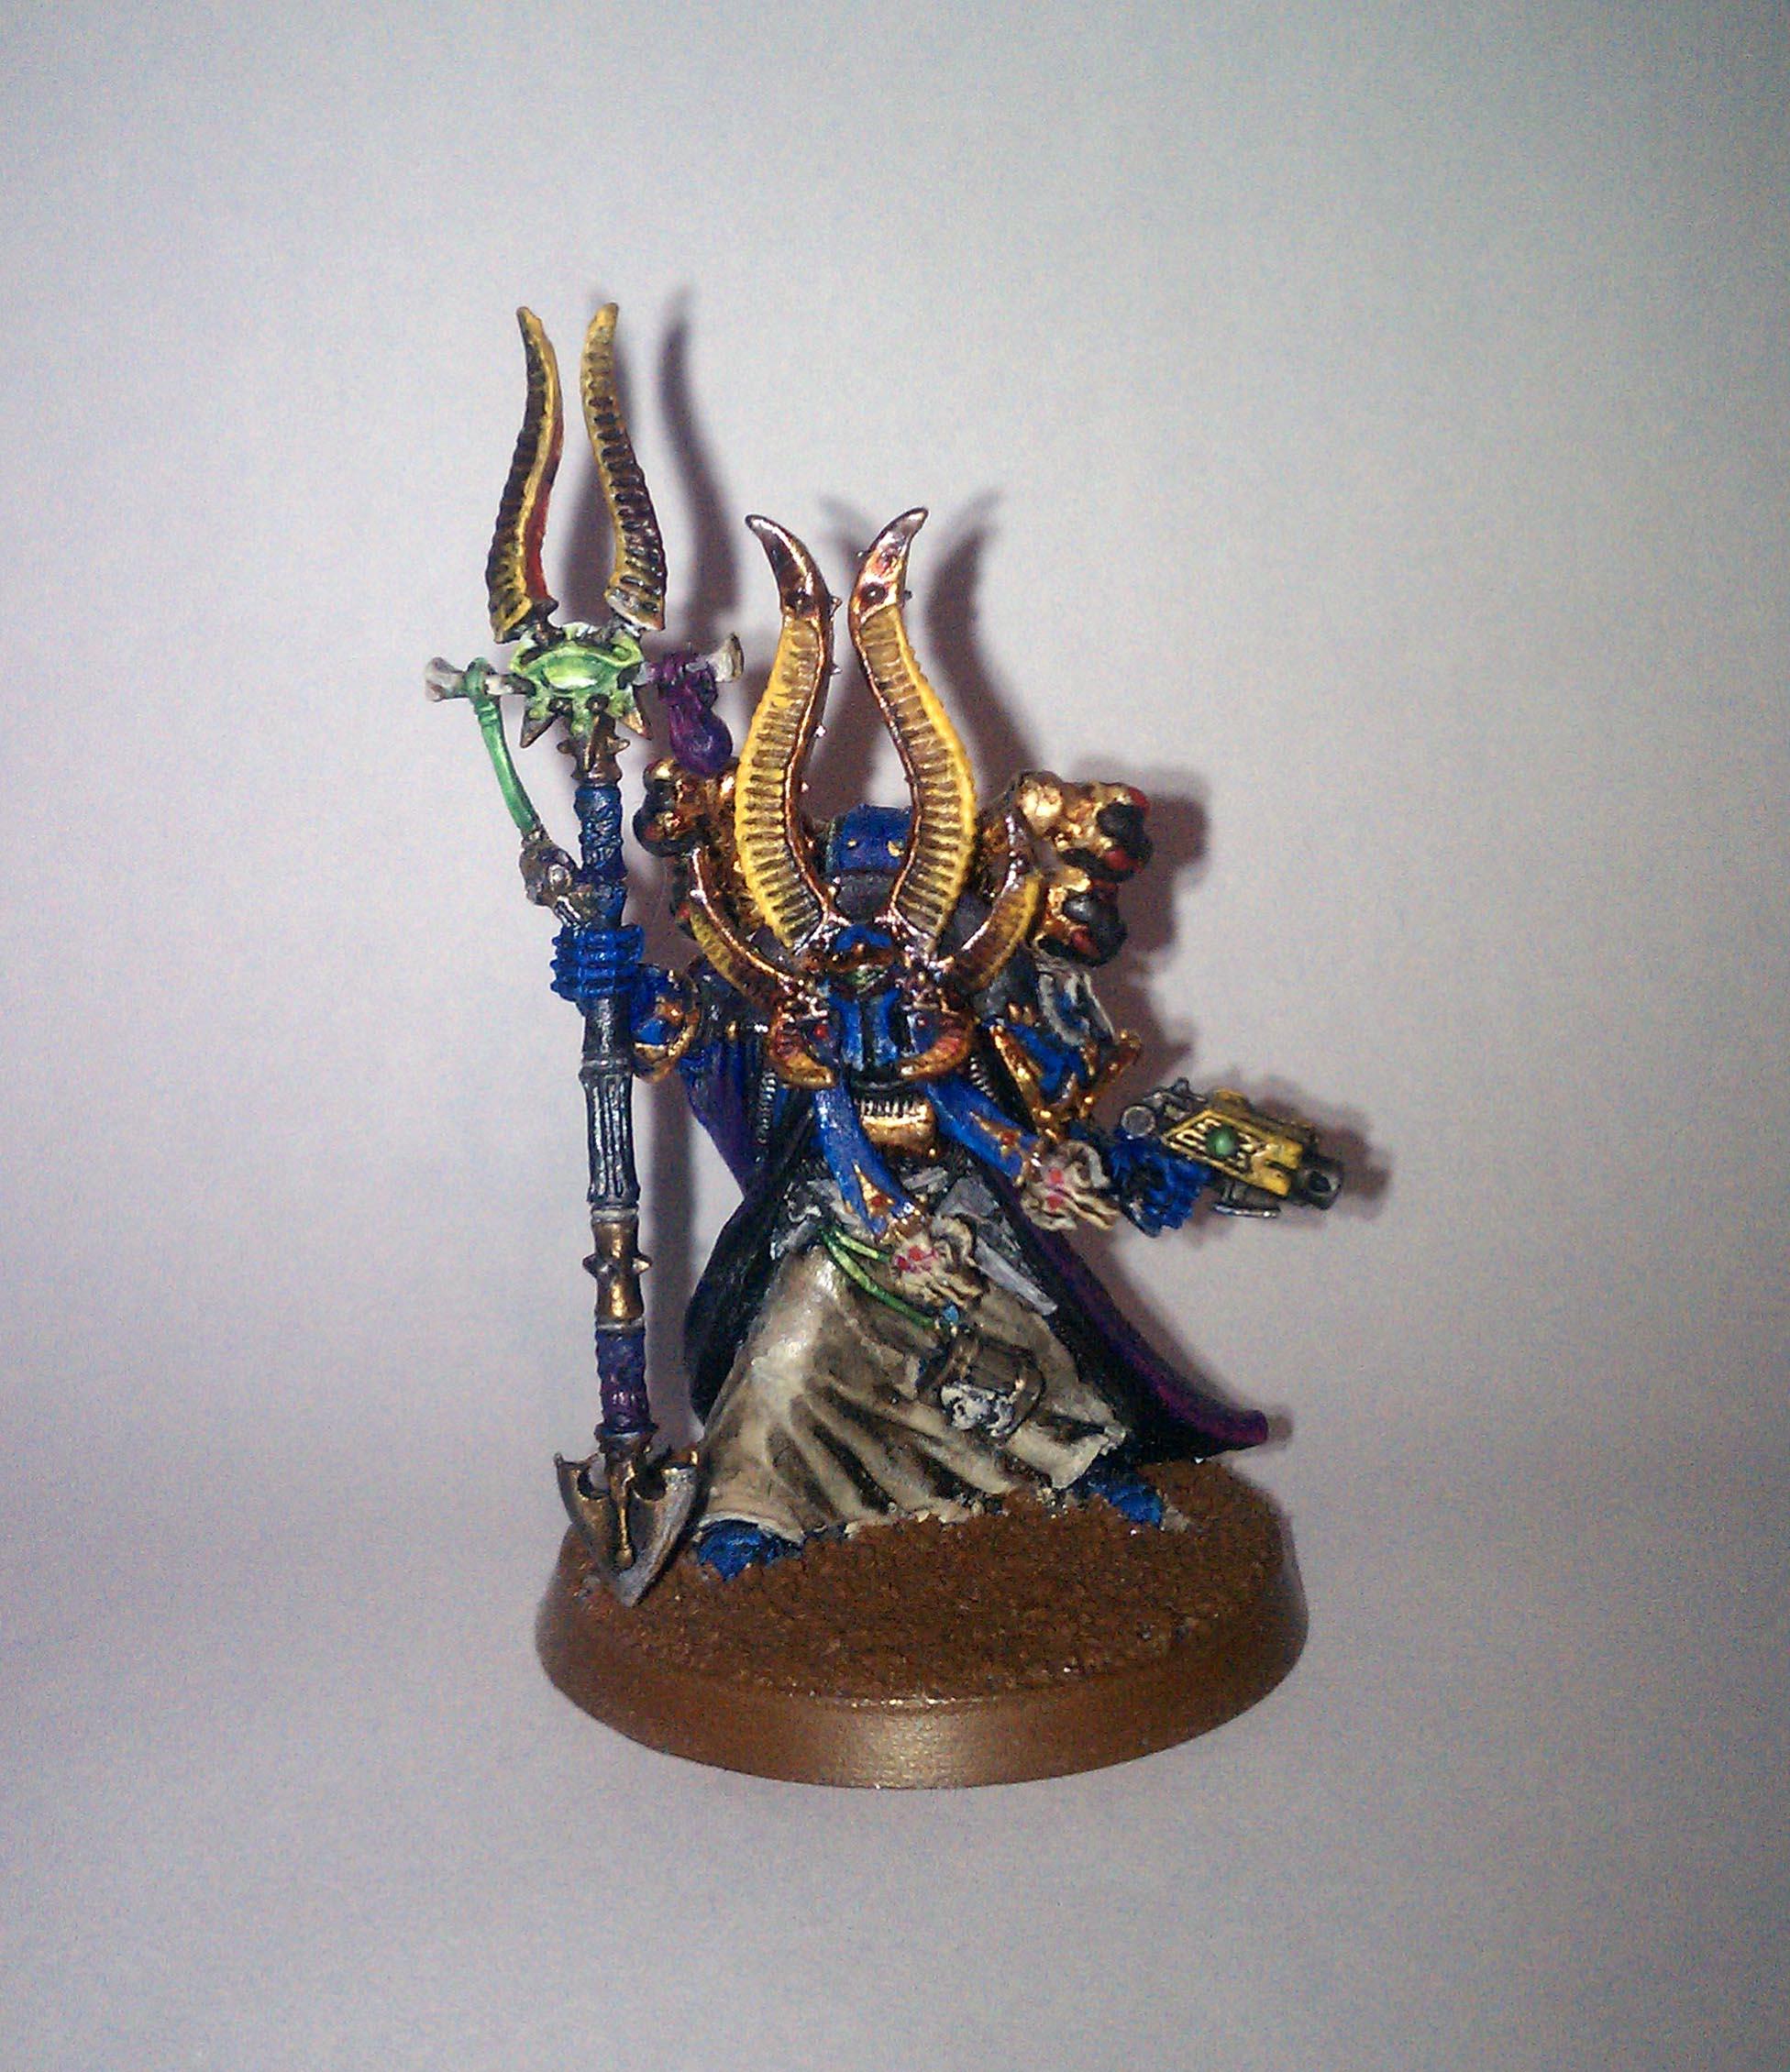 Ahriman, Chaos, Chaos Lord, Chaos Space Marines, Librarian, Lord, Sorcerer, Thousand Sons, Tzeentch